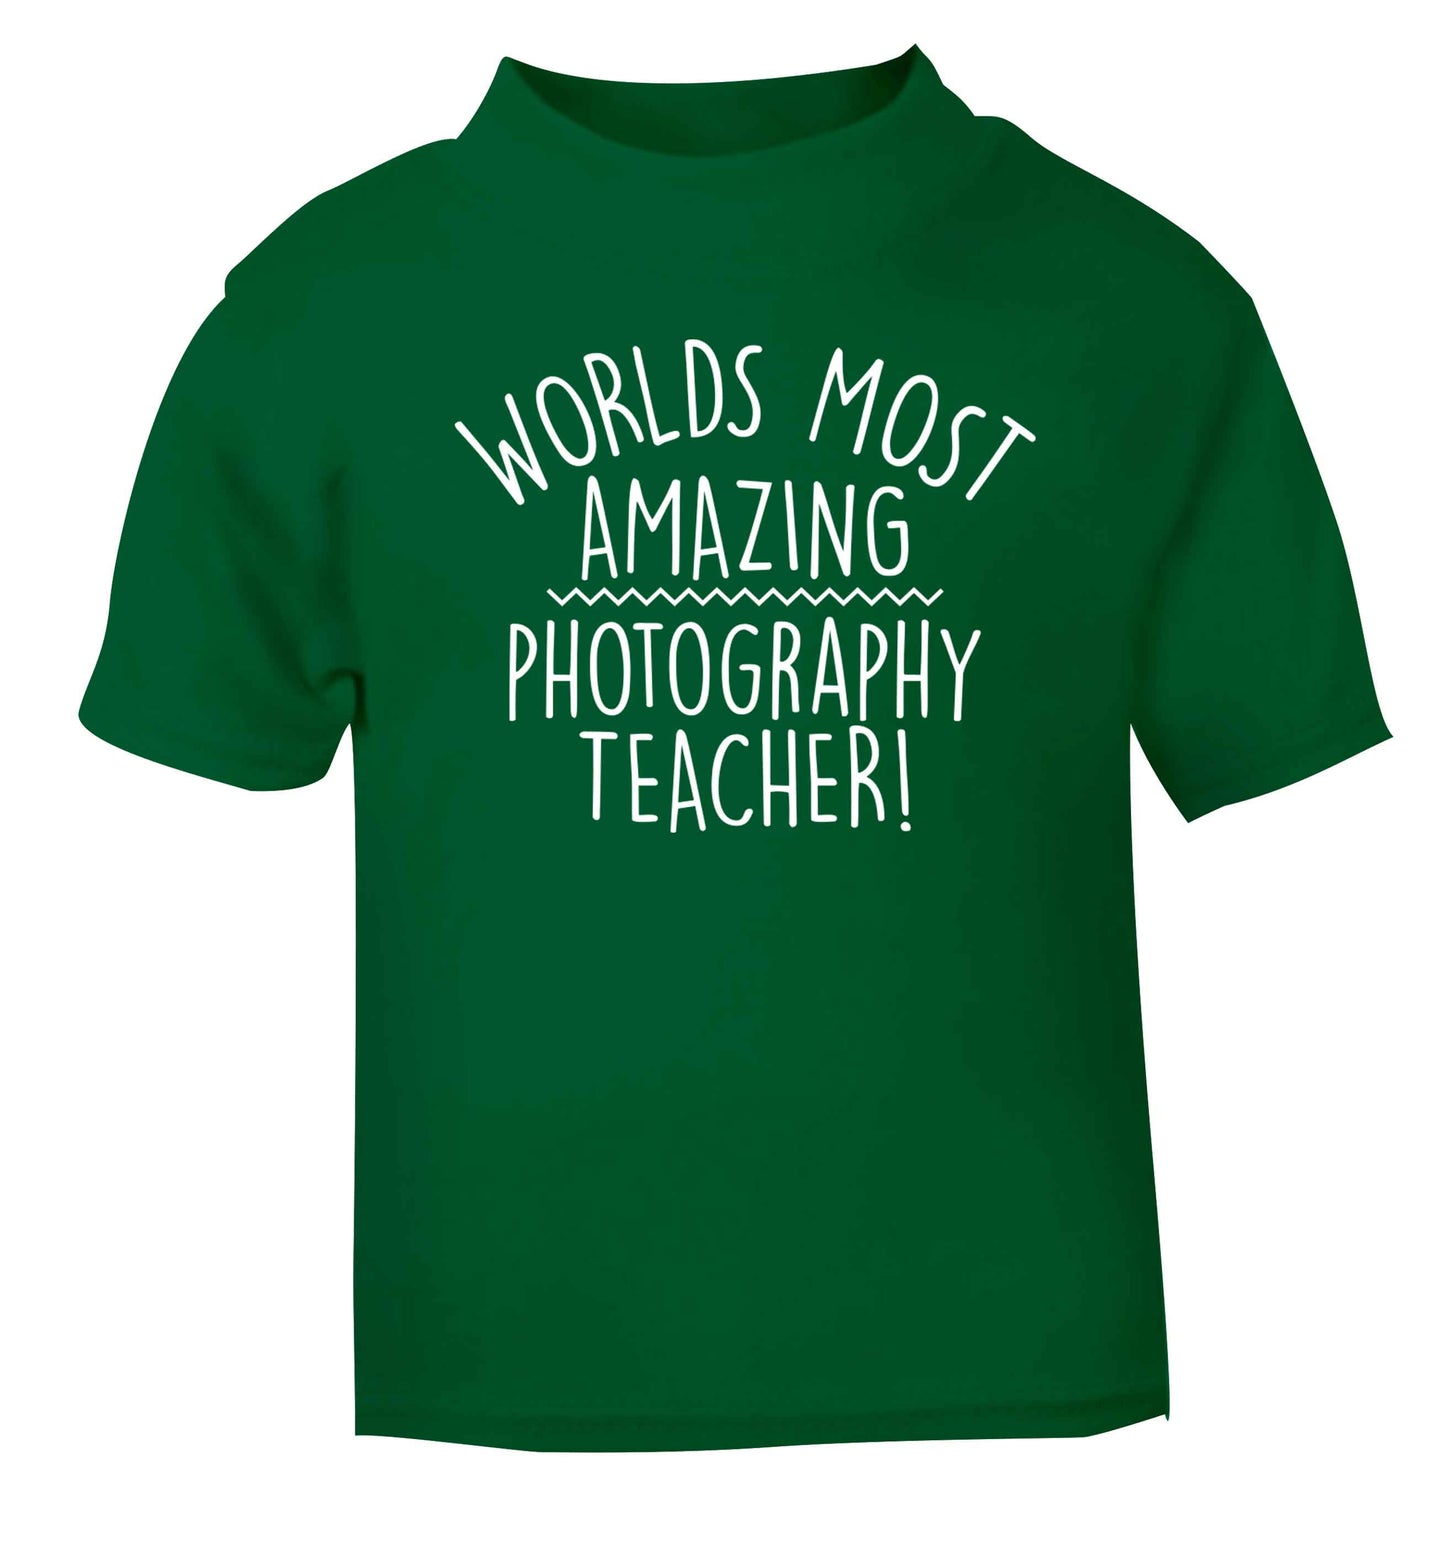 Worlds most amazing photography teacher green baby toddler Tshirt 2 Years